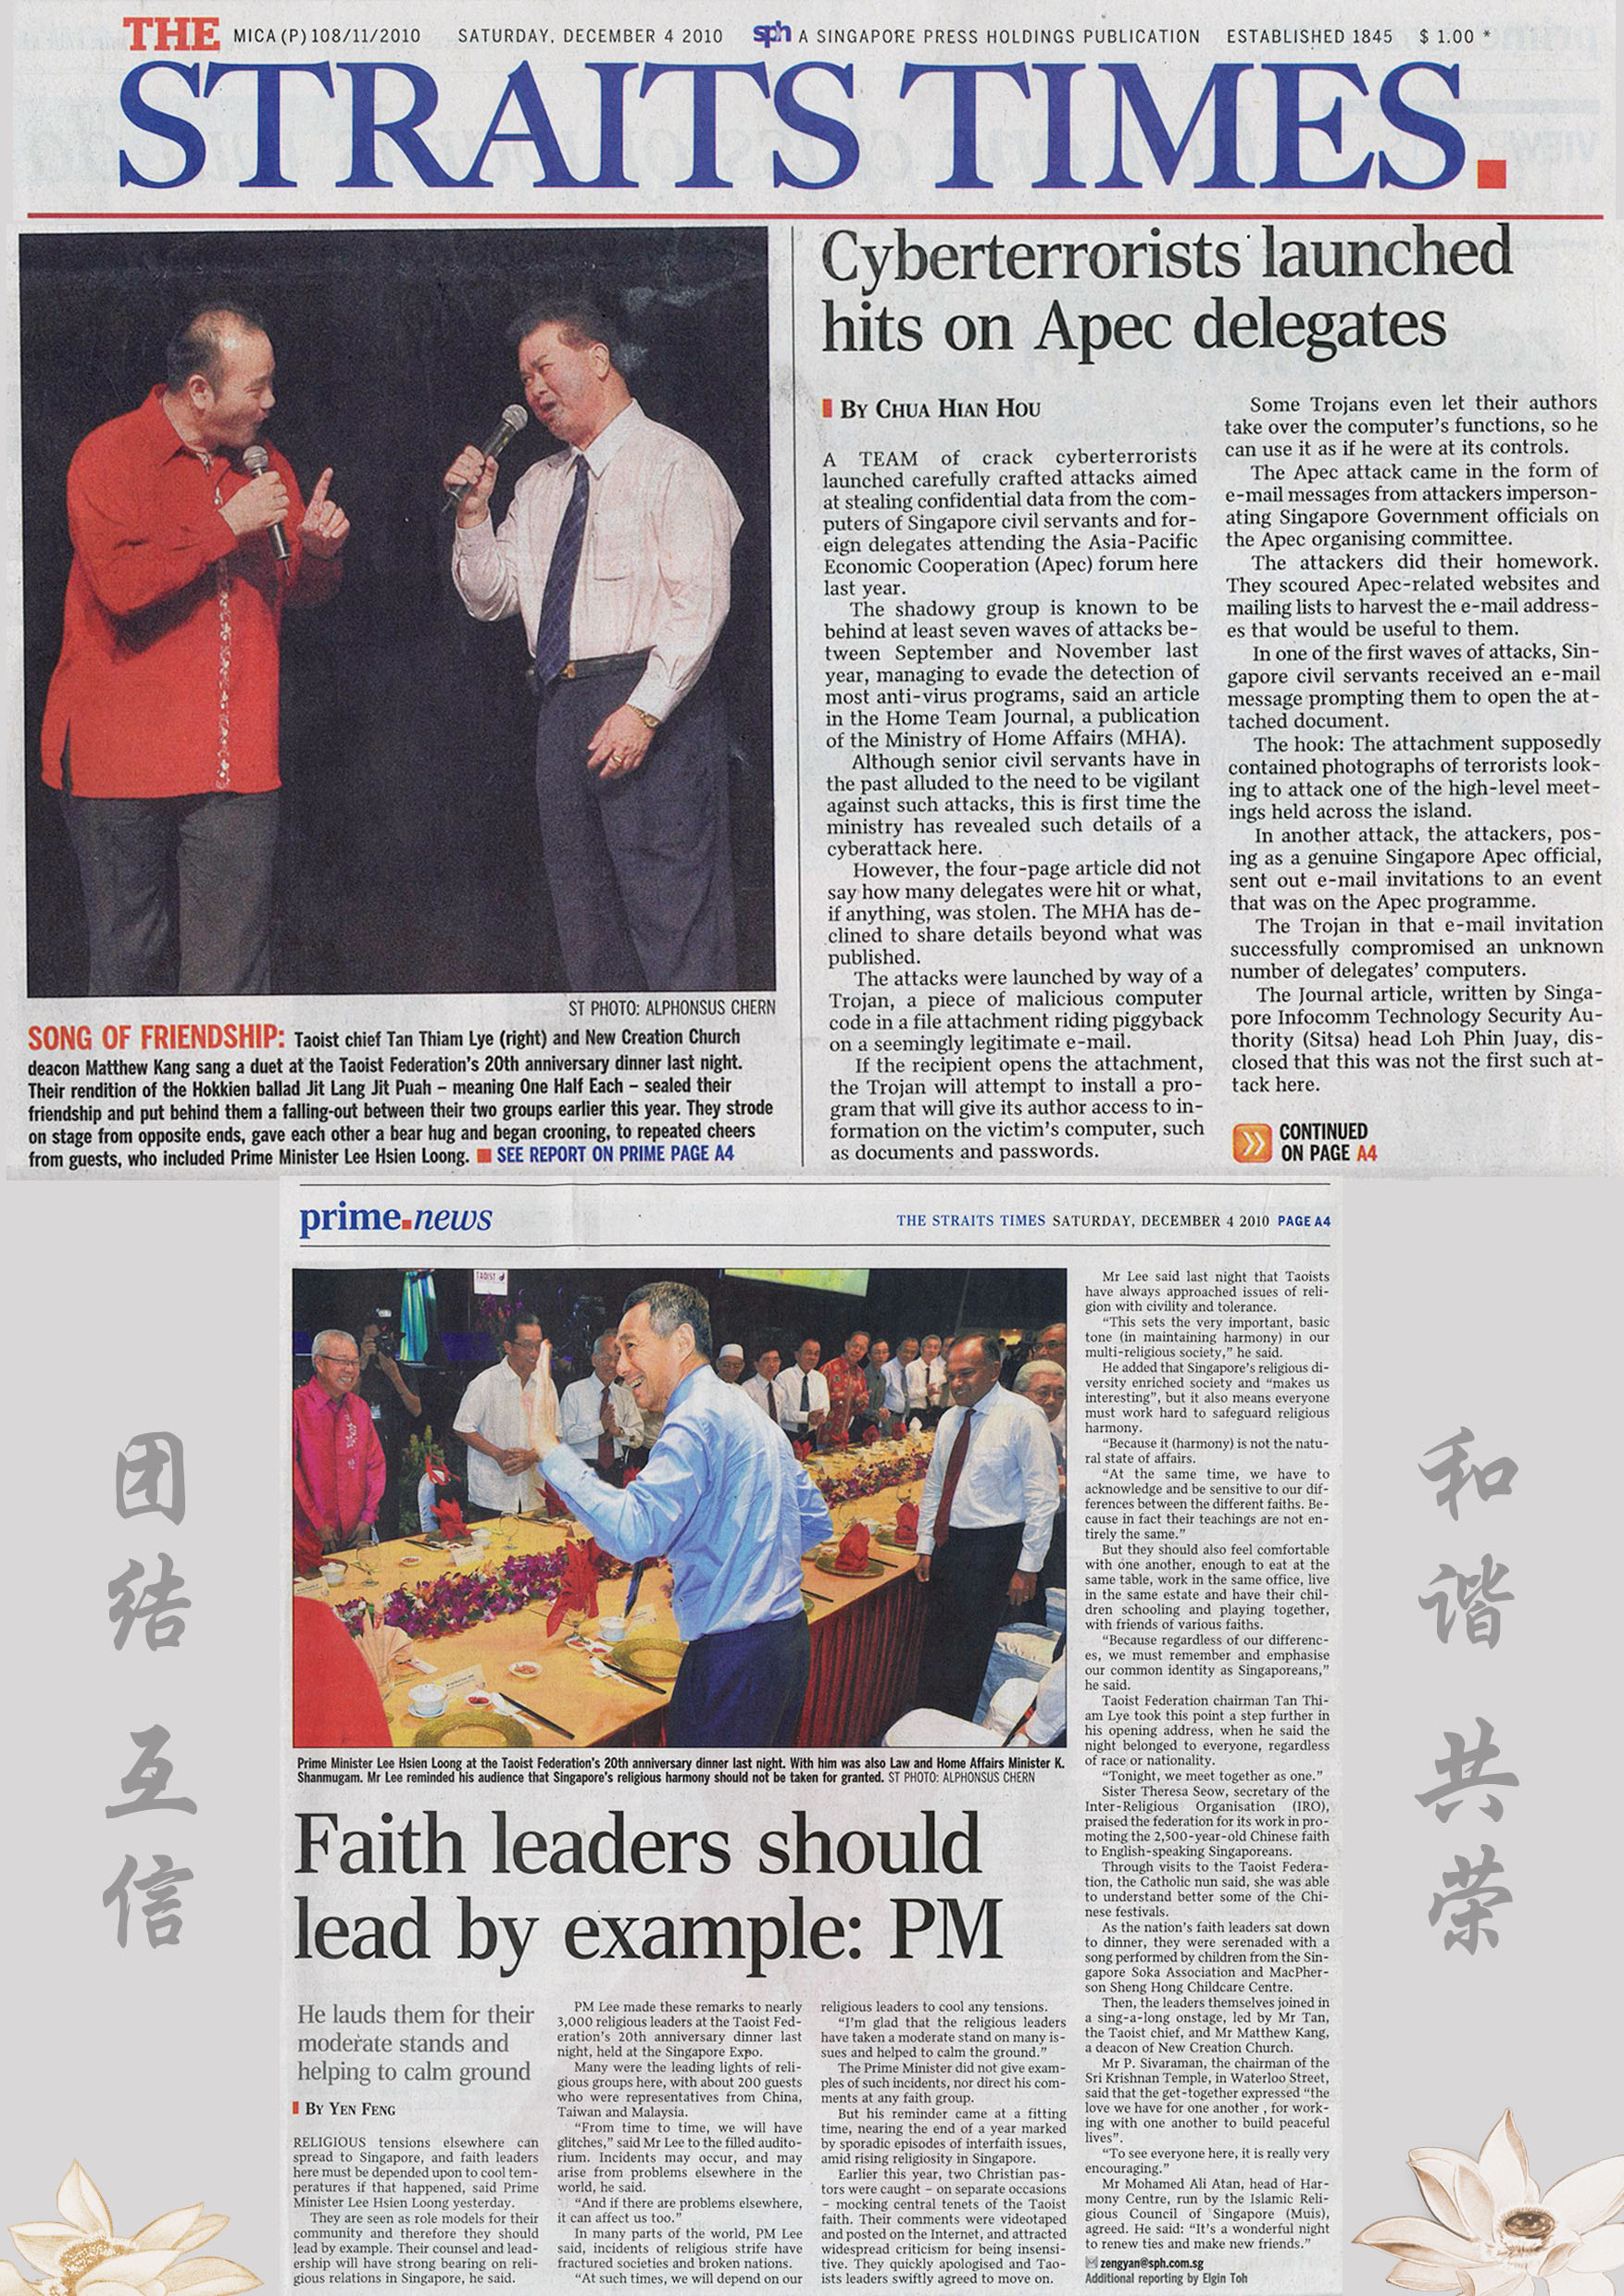 Faith leaders should lead by example: PM